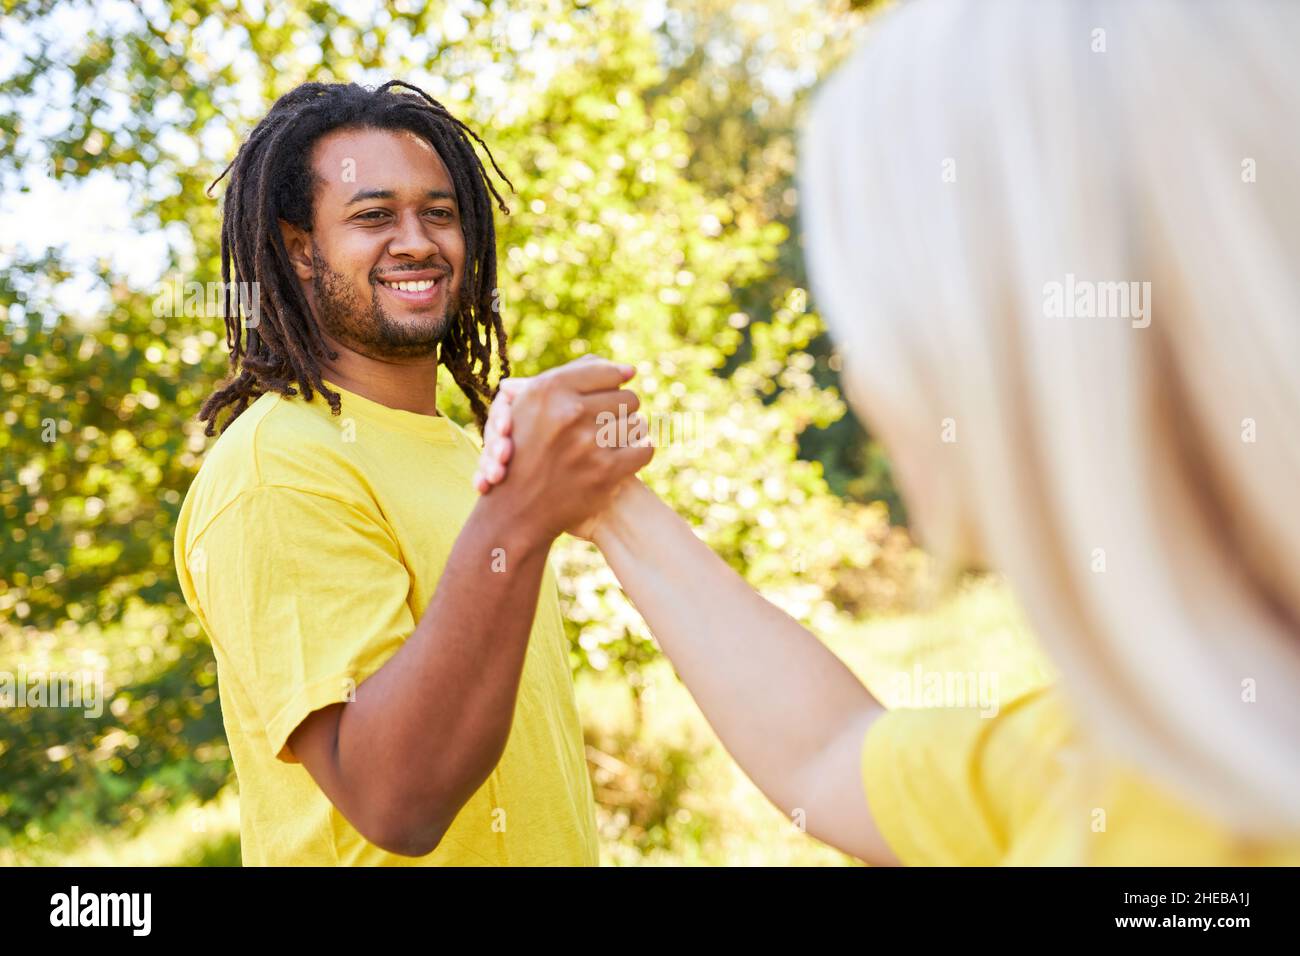 Two young people doing handshake as a greeting or as a team building exercise in summer Stock Photo